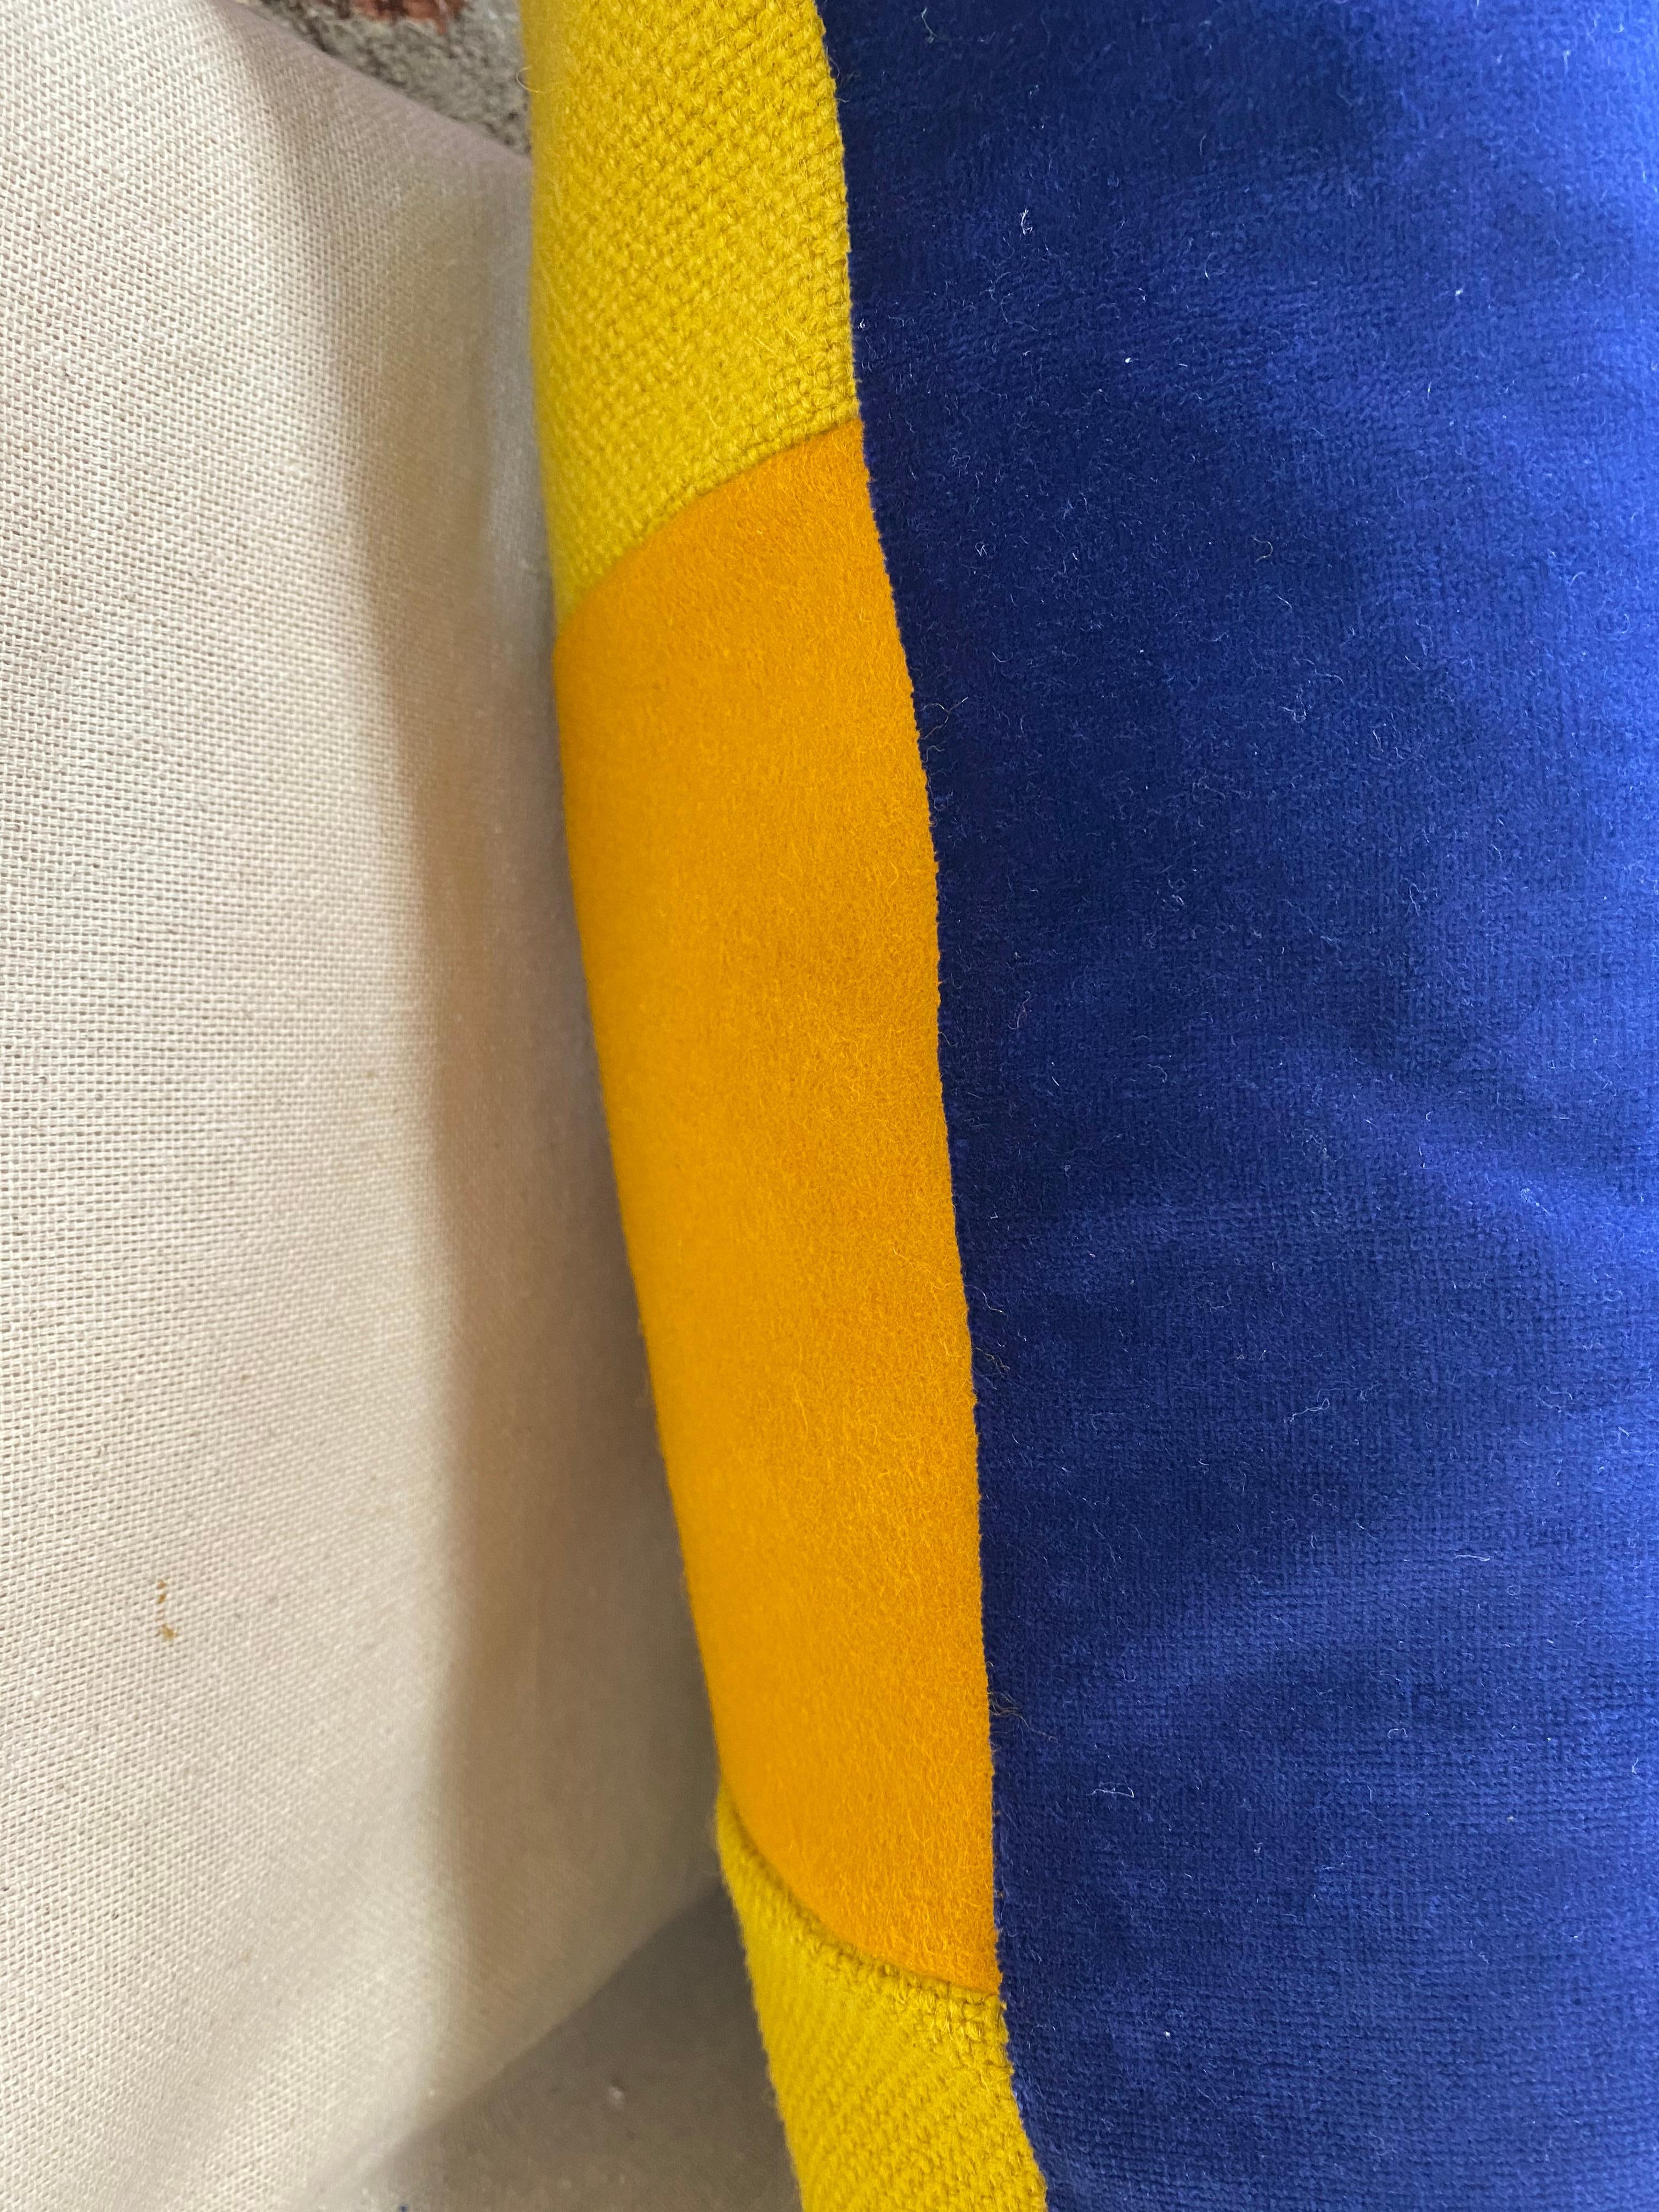 American MultiGrid Pillow with Cashmere Saffron and Electric Blue For Sale